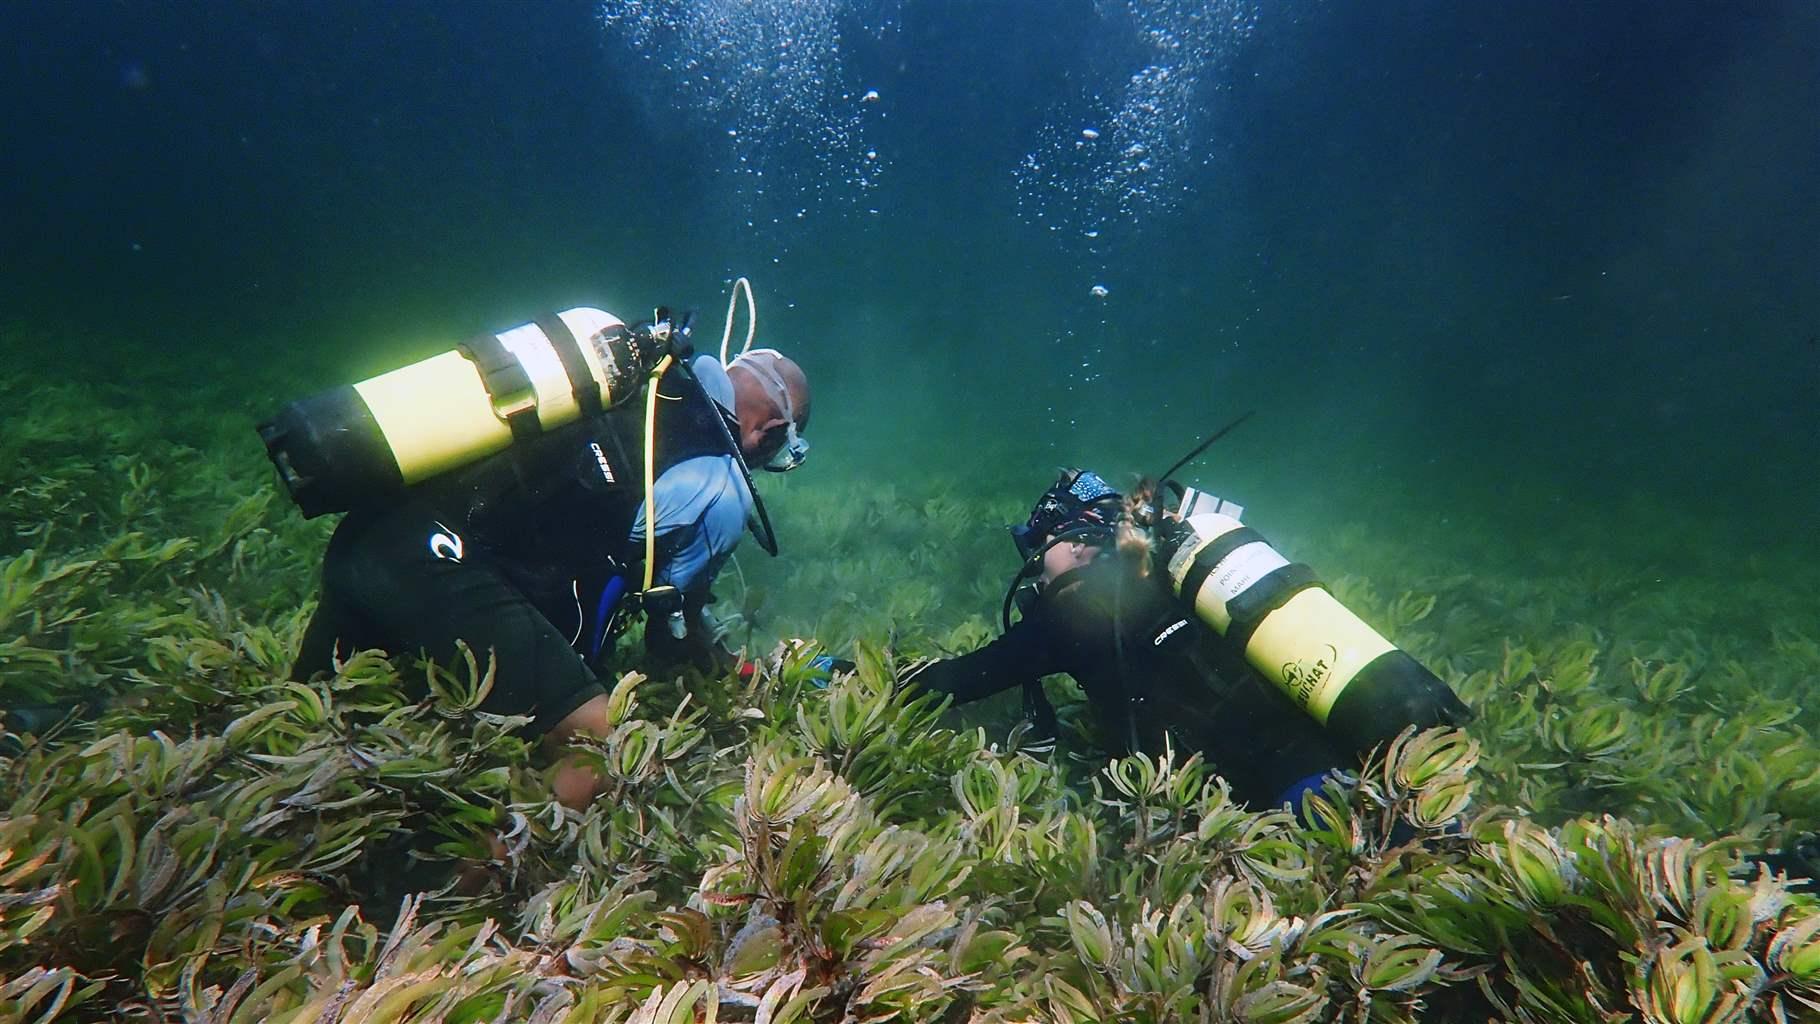 Seagrass - The Ocean Foundation